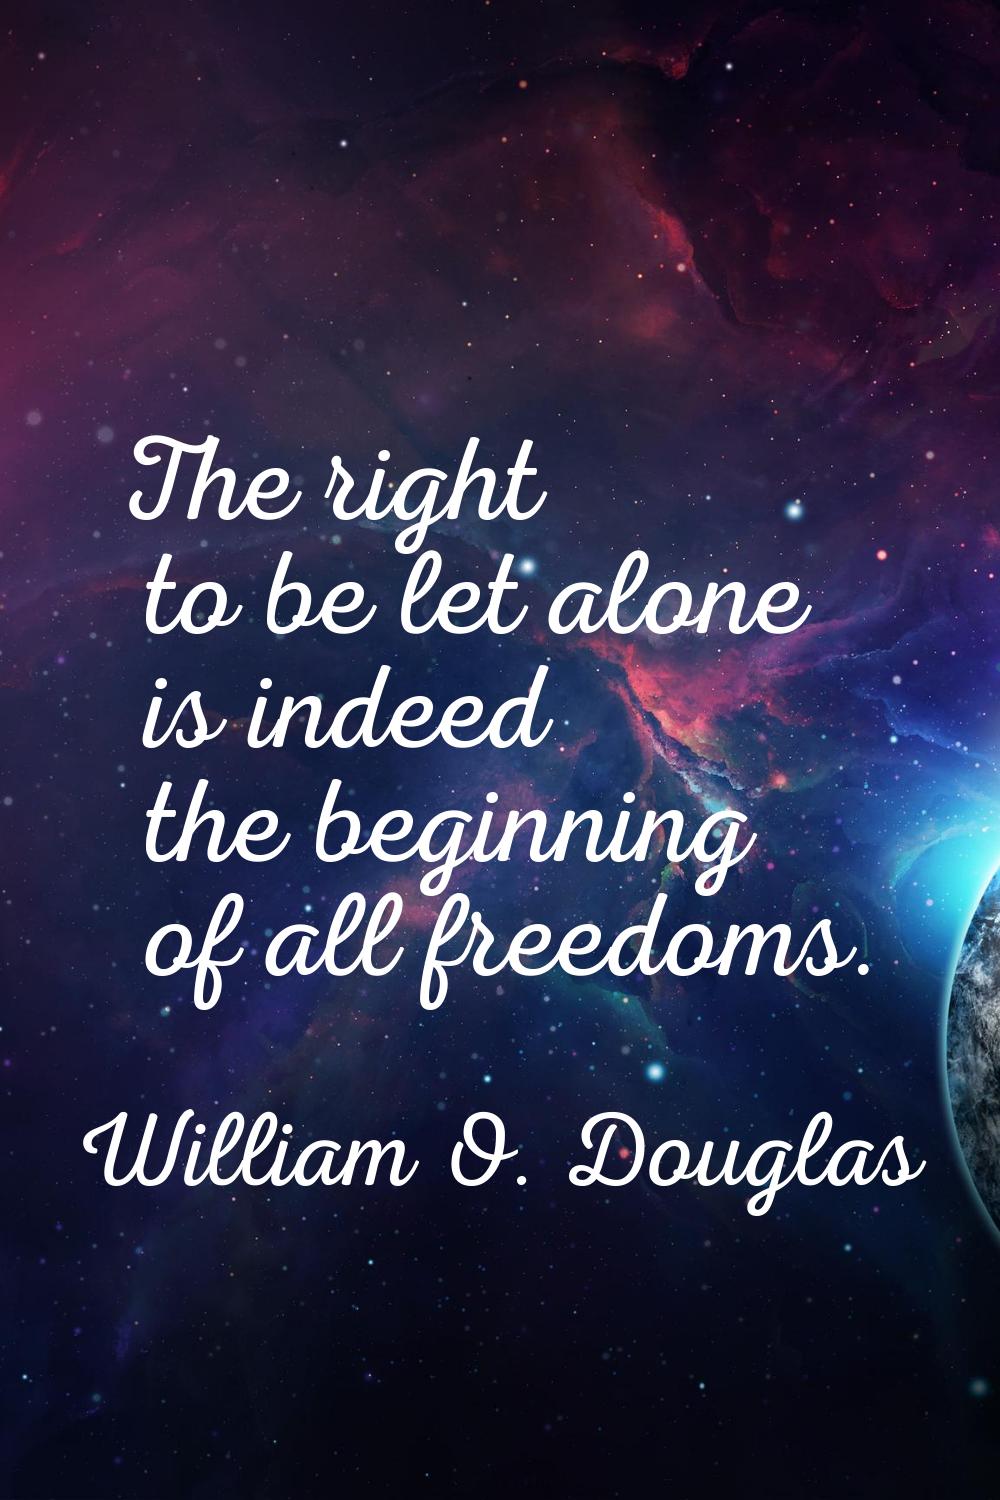 The right to be let alone is indeed the beginning of all freedoms.